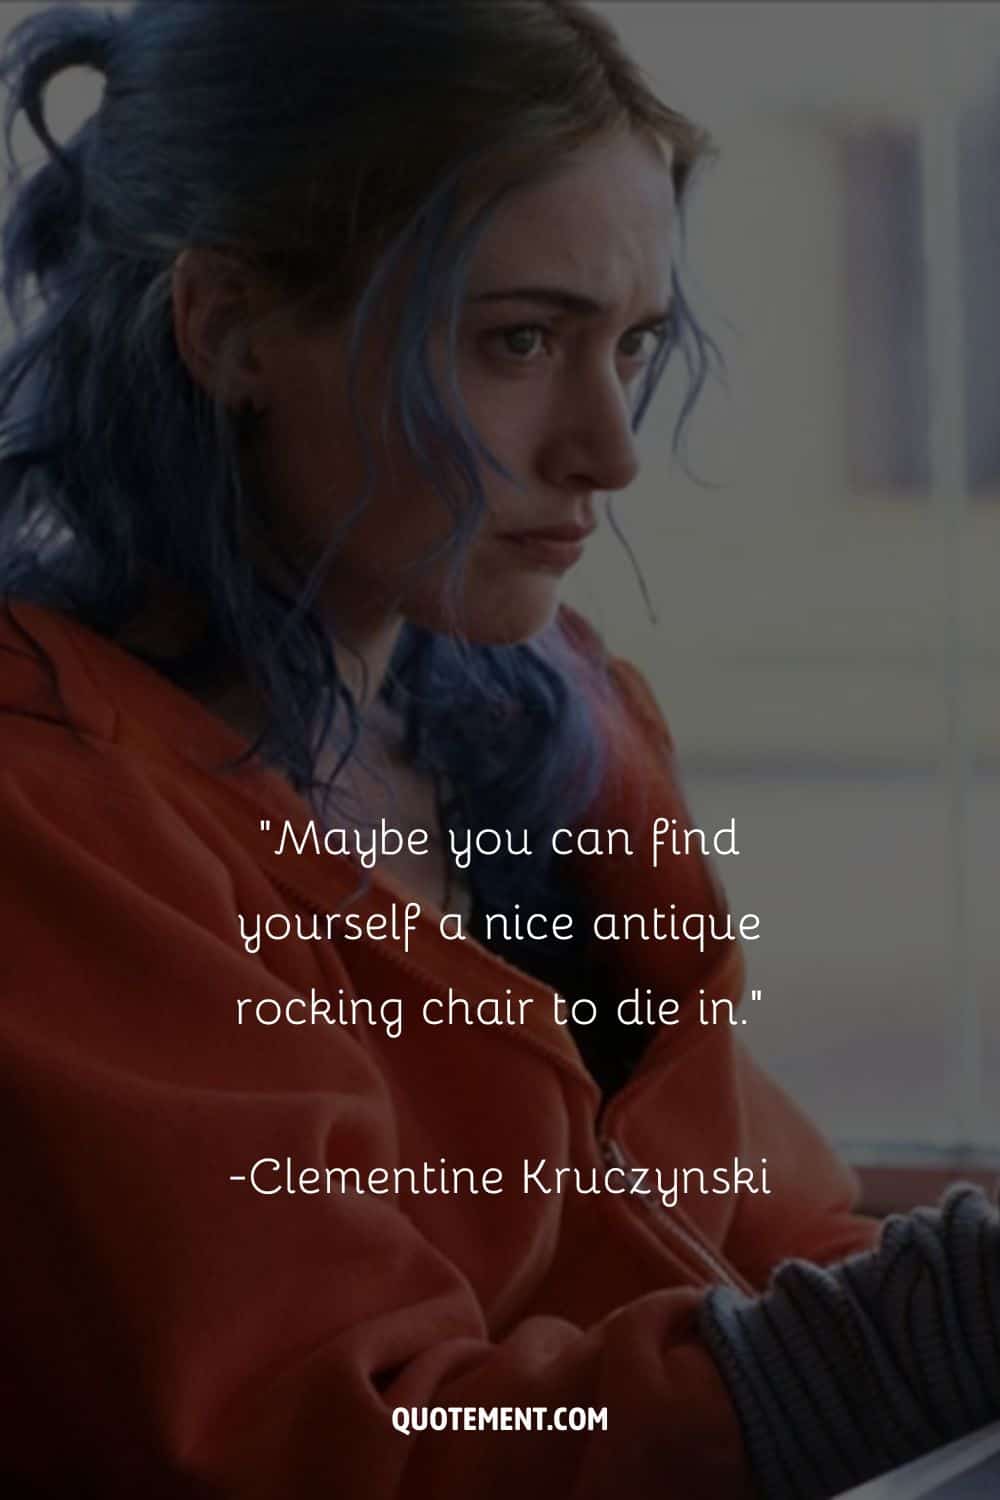 Clementine Kruczynski, quirky and colorful in thought.